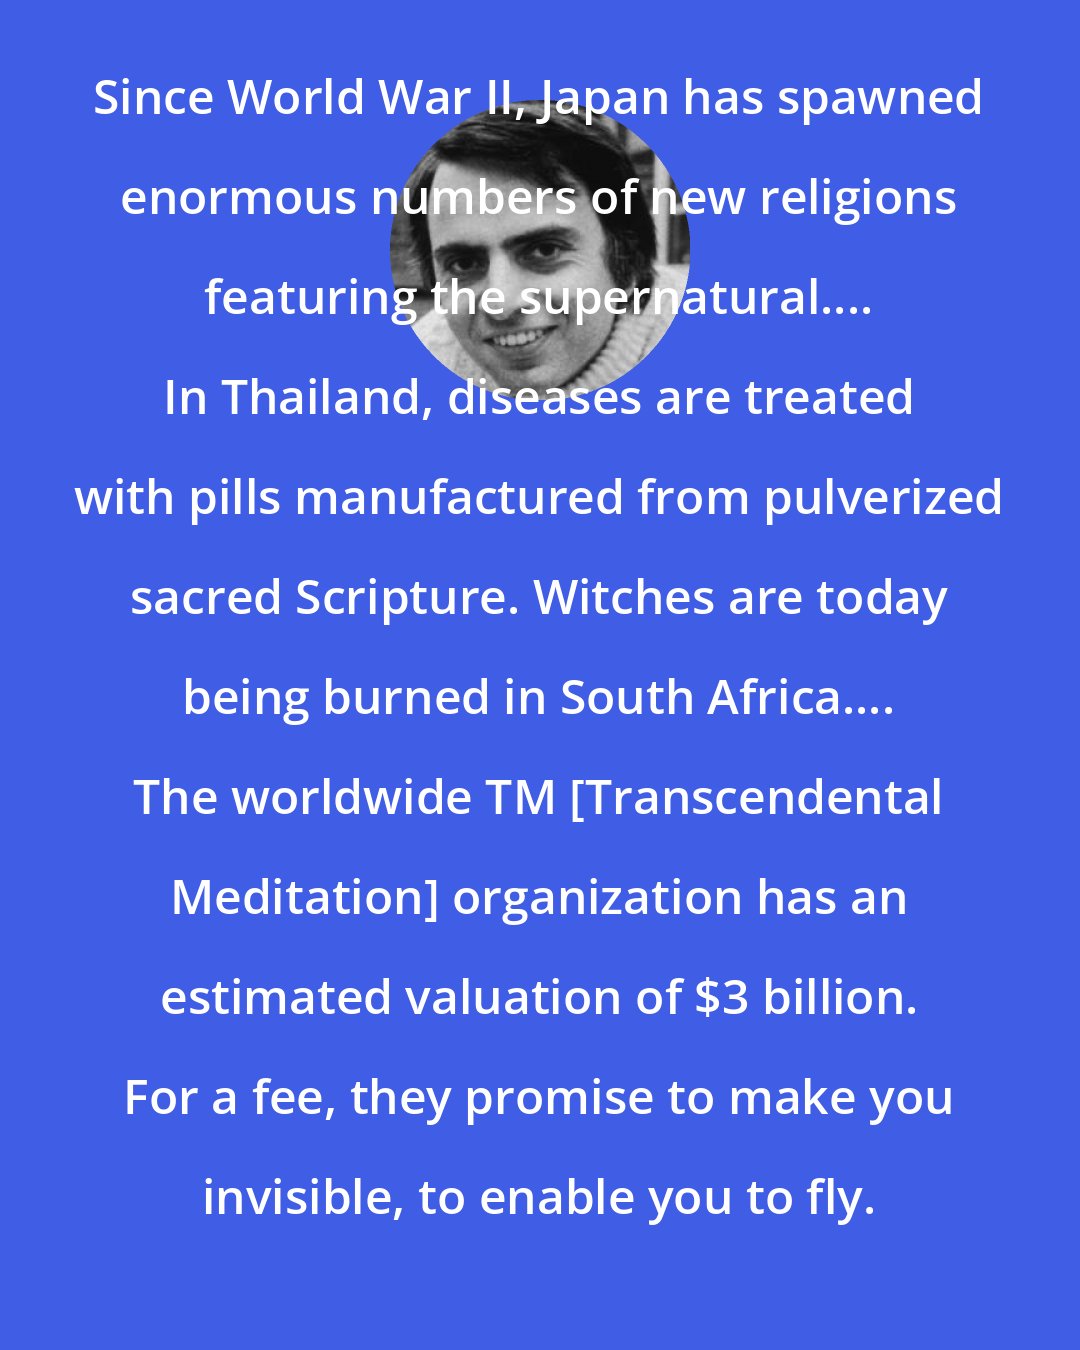 Carl Sagan: Since World War II, Japan has spawned enormous numbers of new religions featuring the supernatural.... In Thailand, diseases are treated with pills manufactured from pulverized sacred Scripture. Witches are today being burned in South Africa.... The worldwide TM [Transcendental Meditation] organization has an estimated valuation of $3 billion. For a fee, they promise to make you invisible, to enable you to fly.